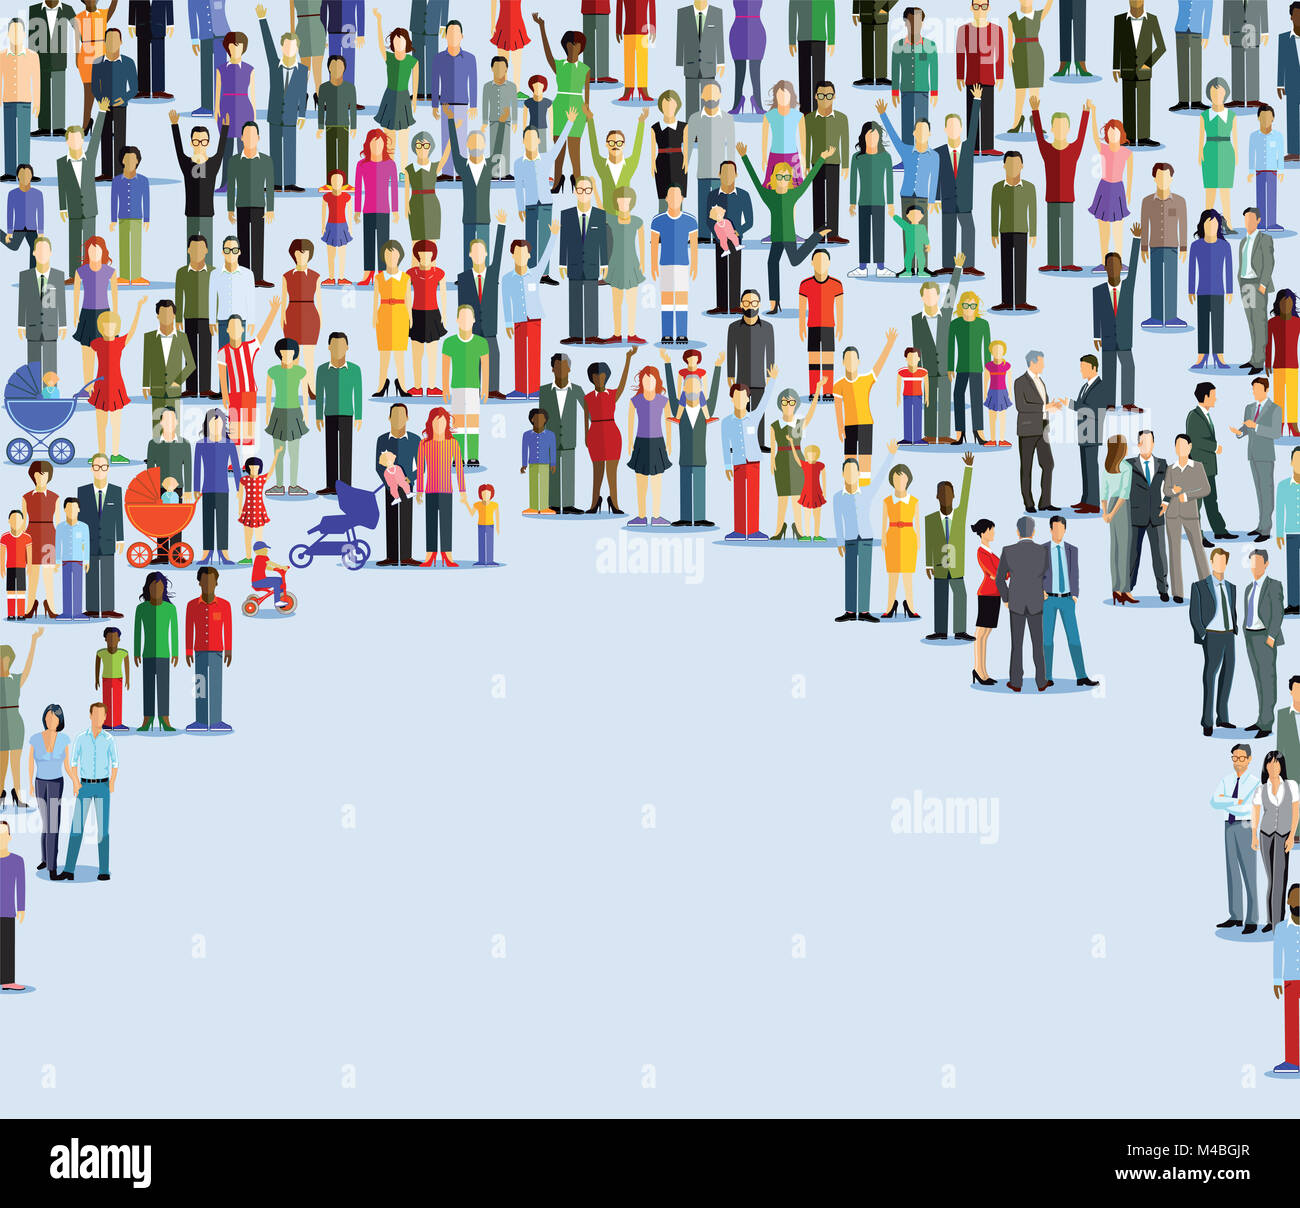 Large quantities of human are grouped together Stock Photo